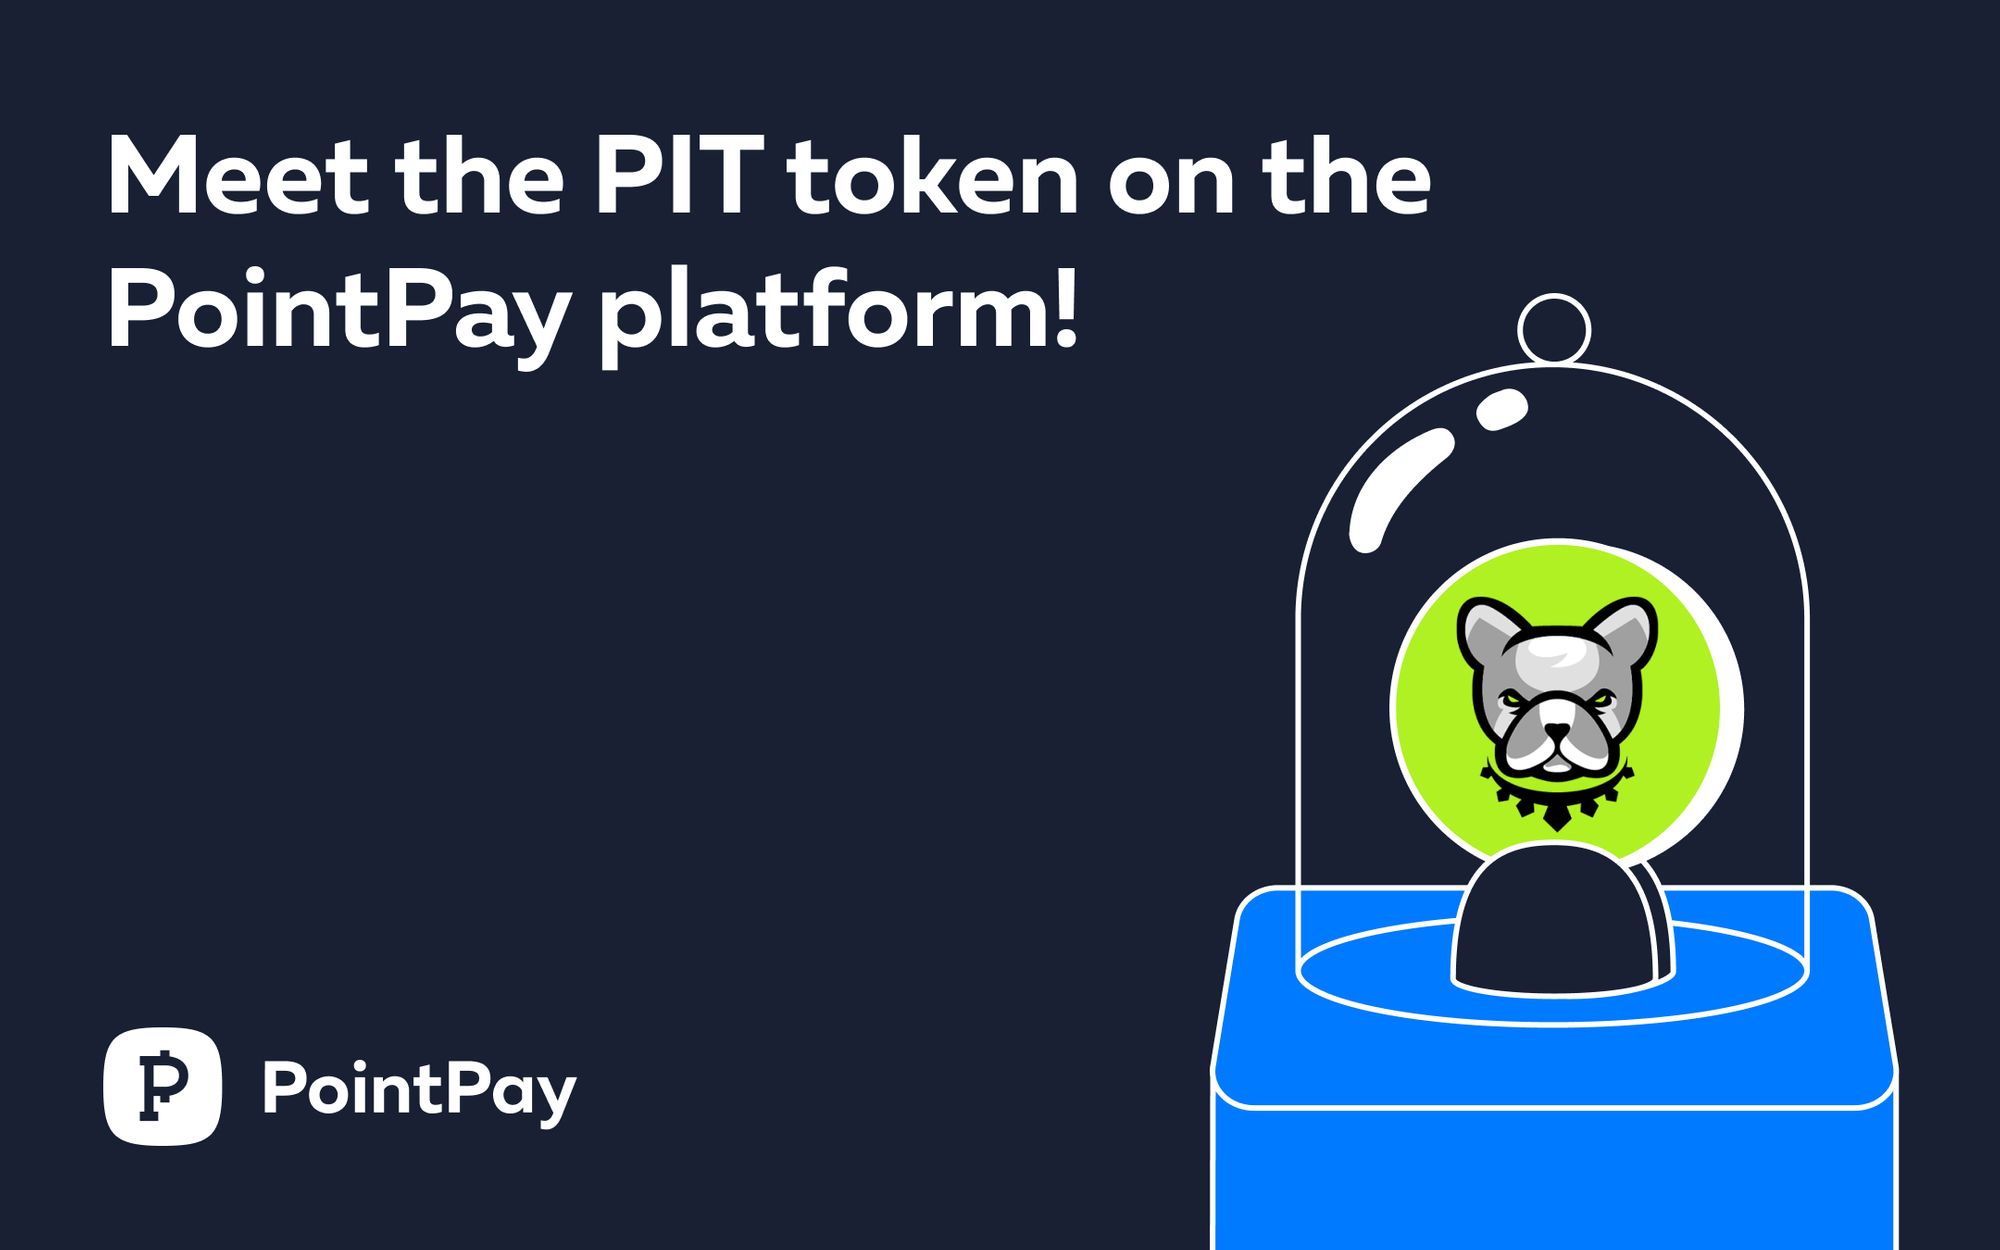 Pitbull (PIT) token is listed on the PointPay platform!